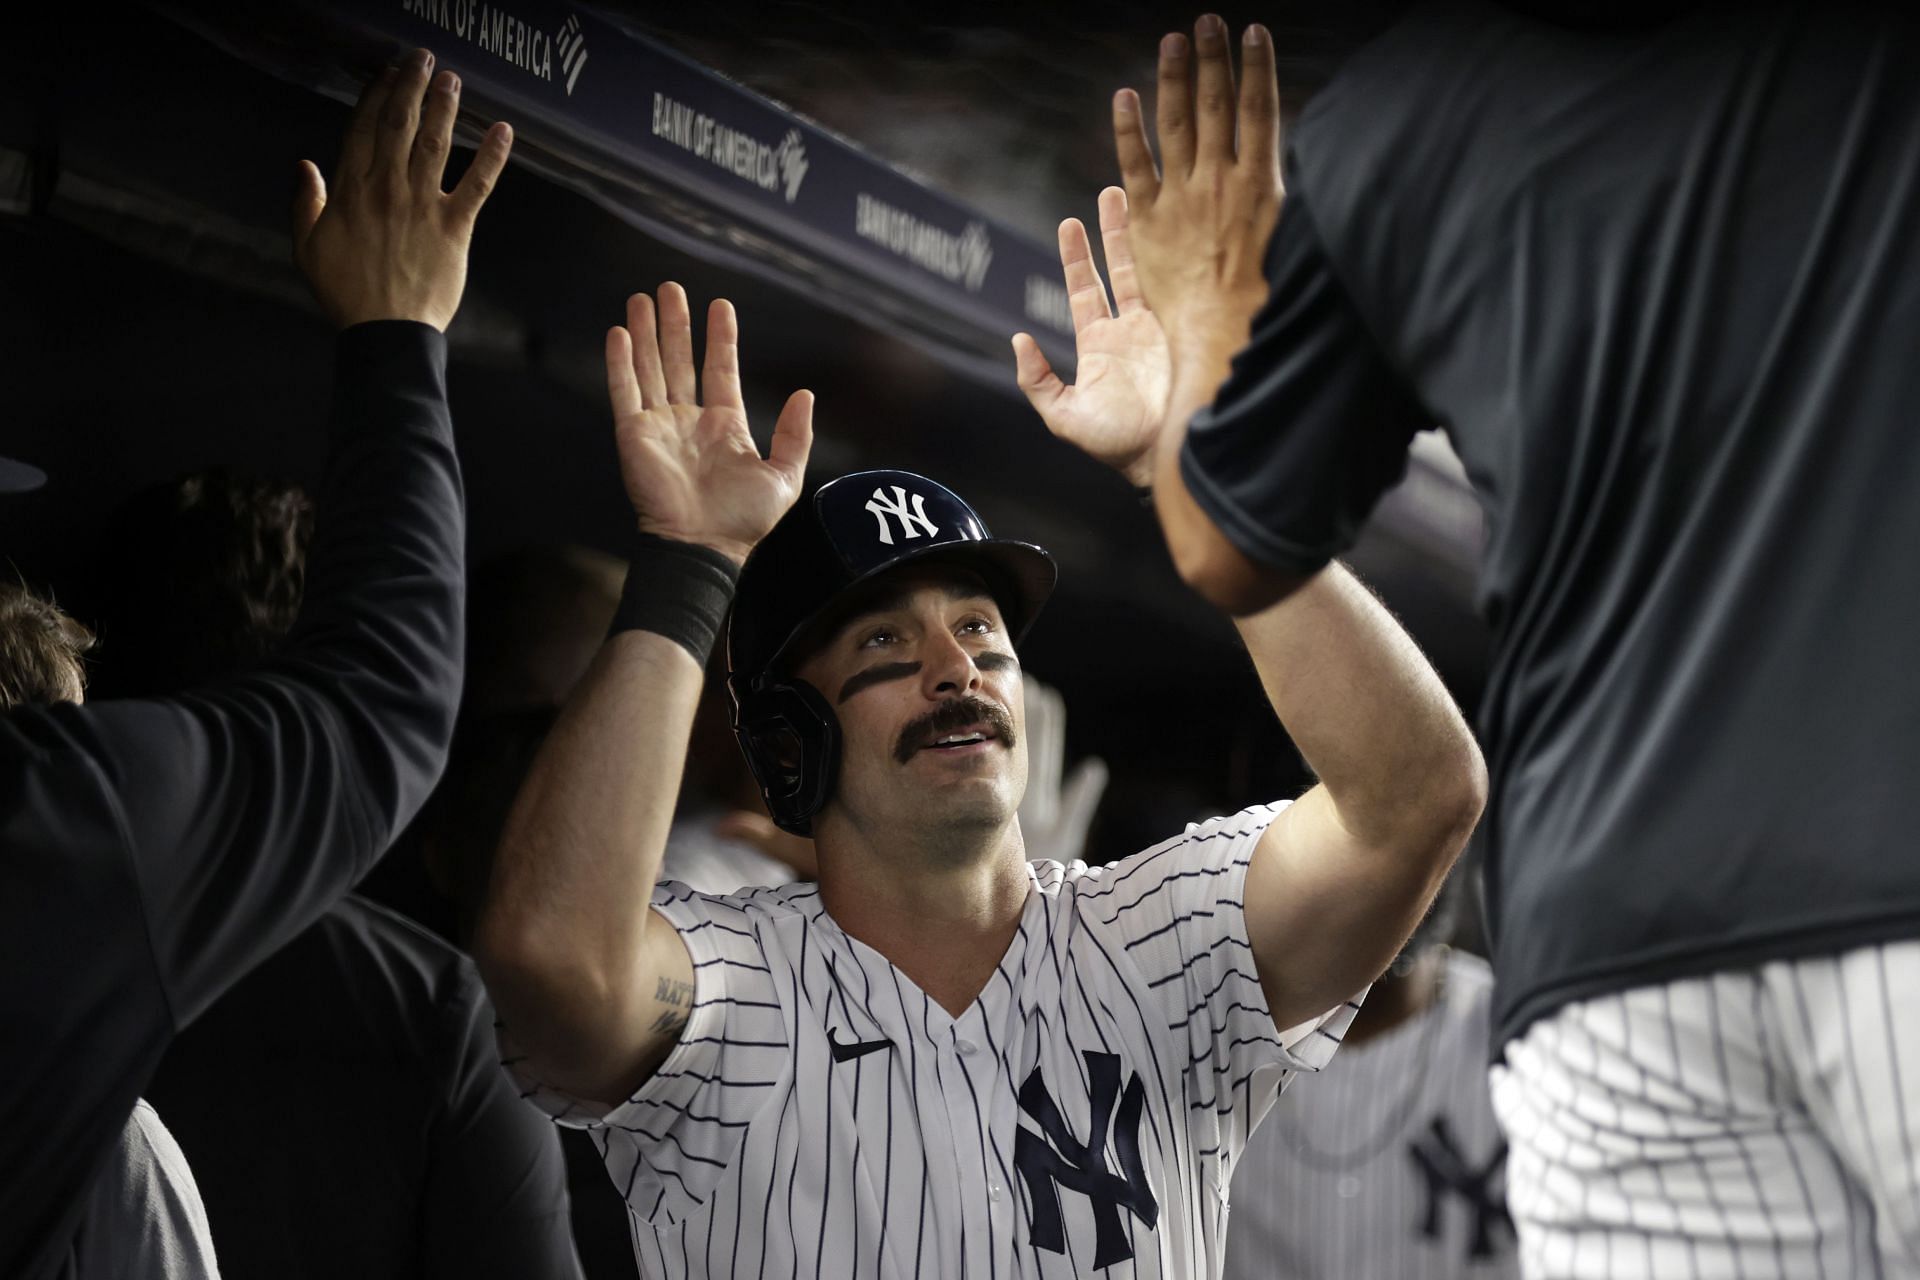 Matt Carpenter of the New York Yankees celebrates in the dugout during a game against the Detroit Tigers.